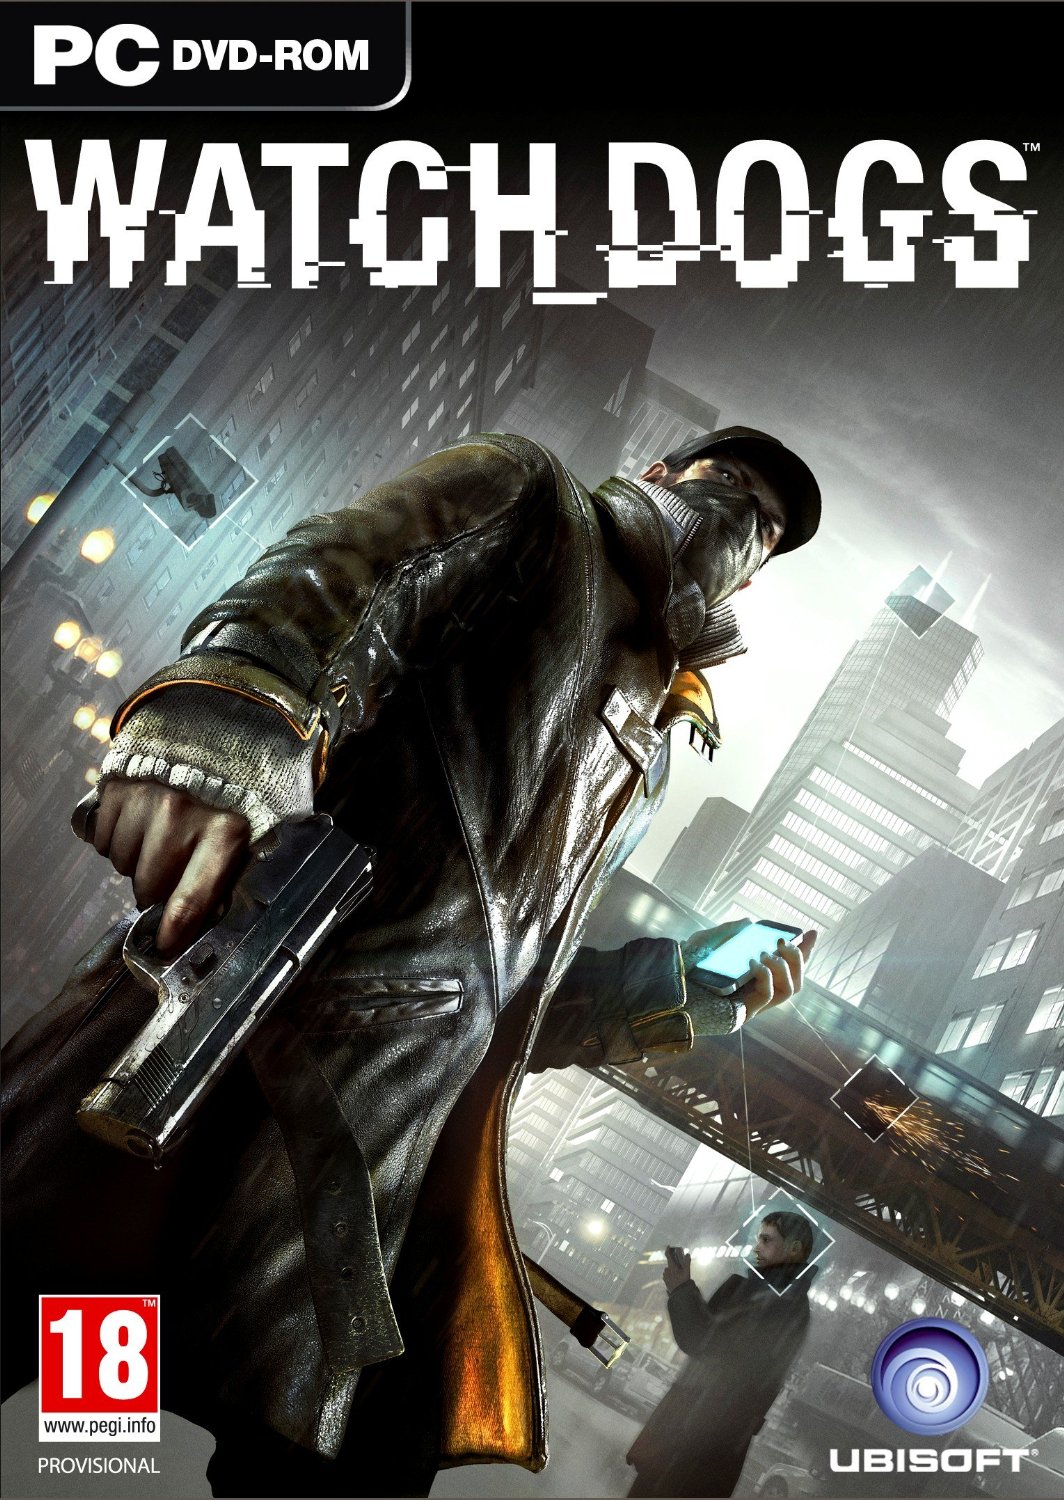 Watch Dogs Deluxe Edition CD Key for Ubisoft Connect